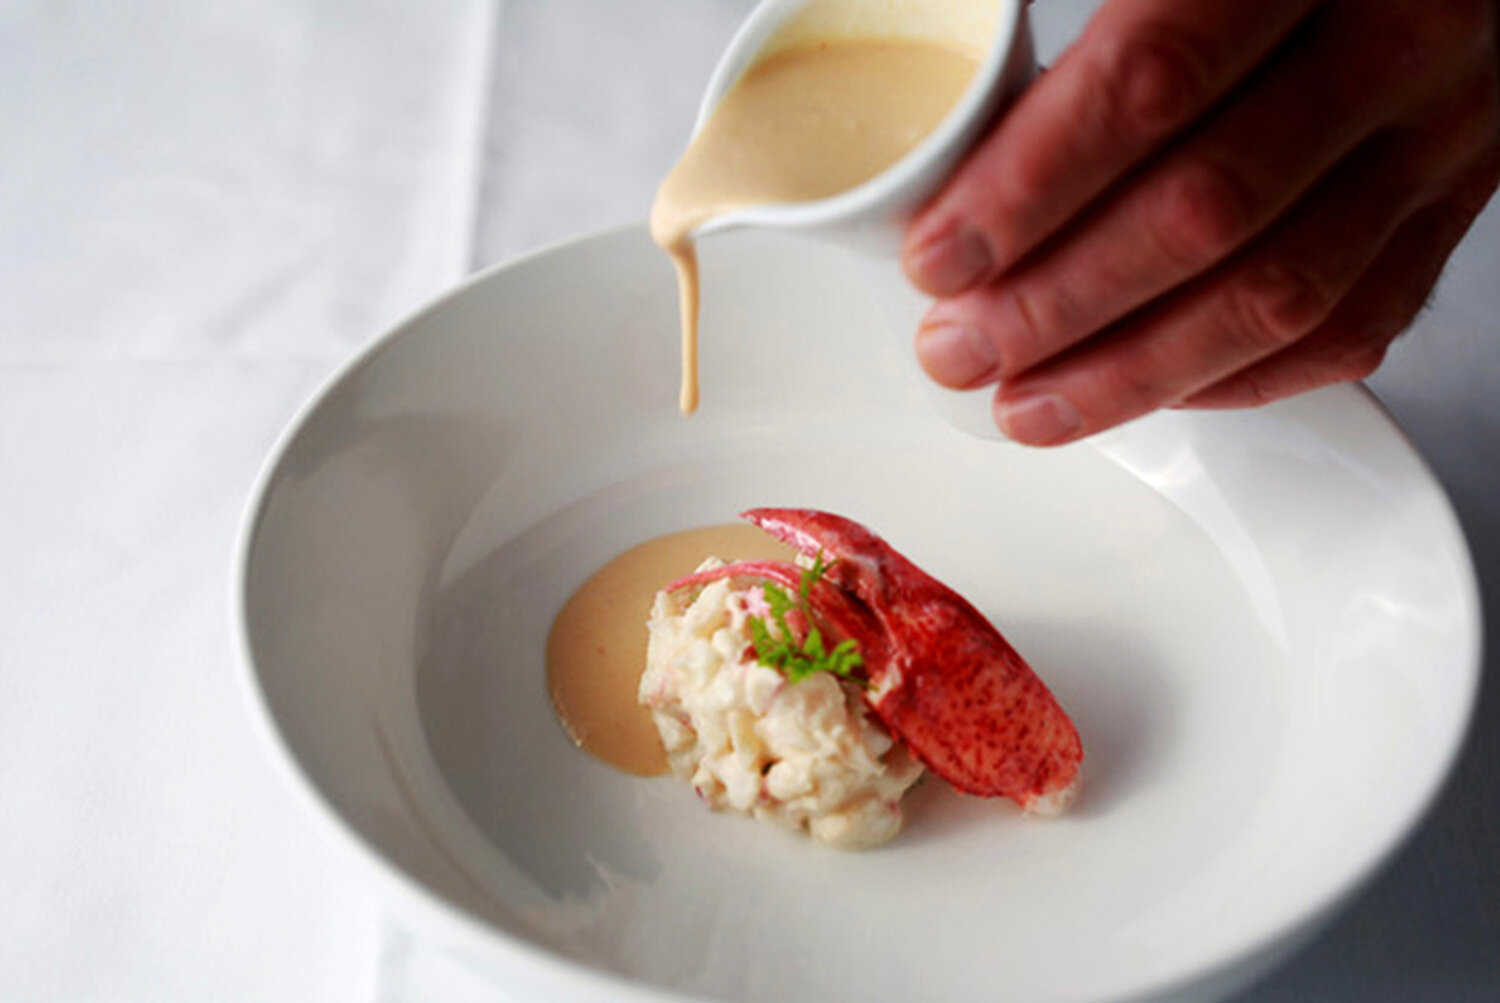 Lobster bisque served with style at Ella’s